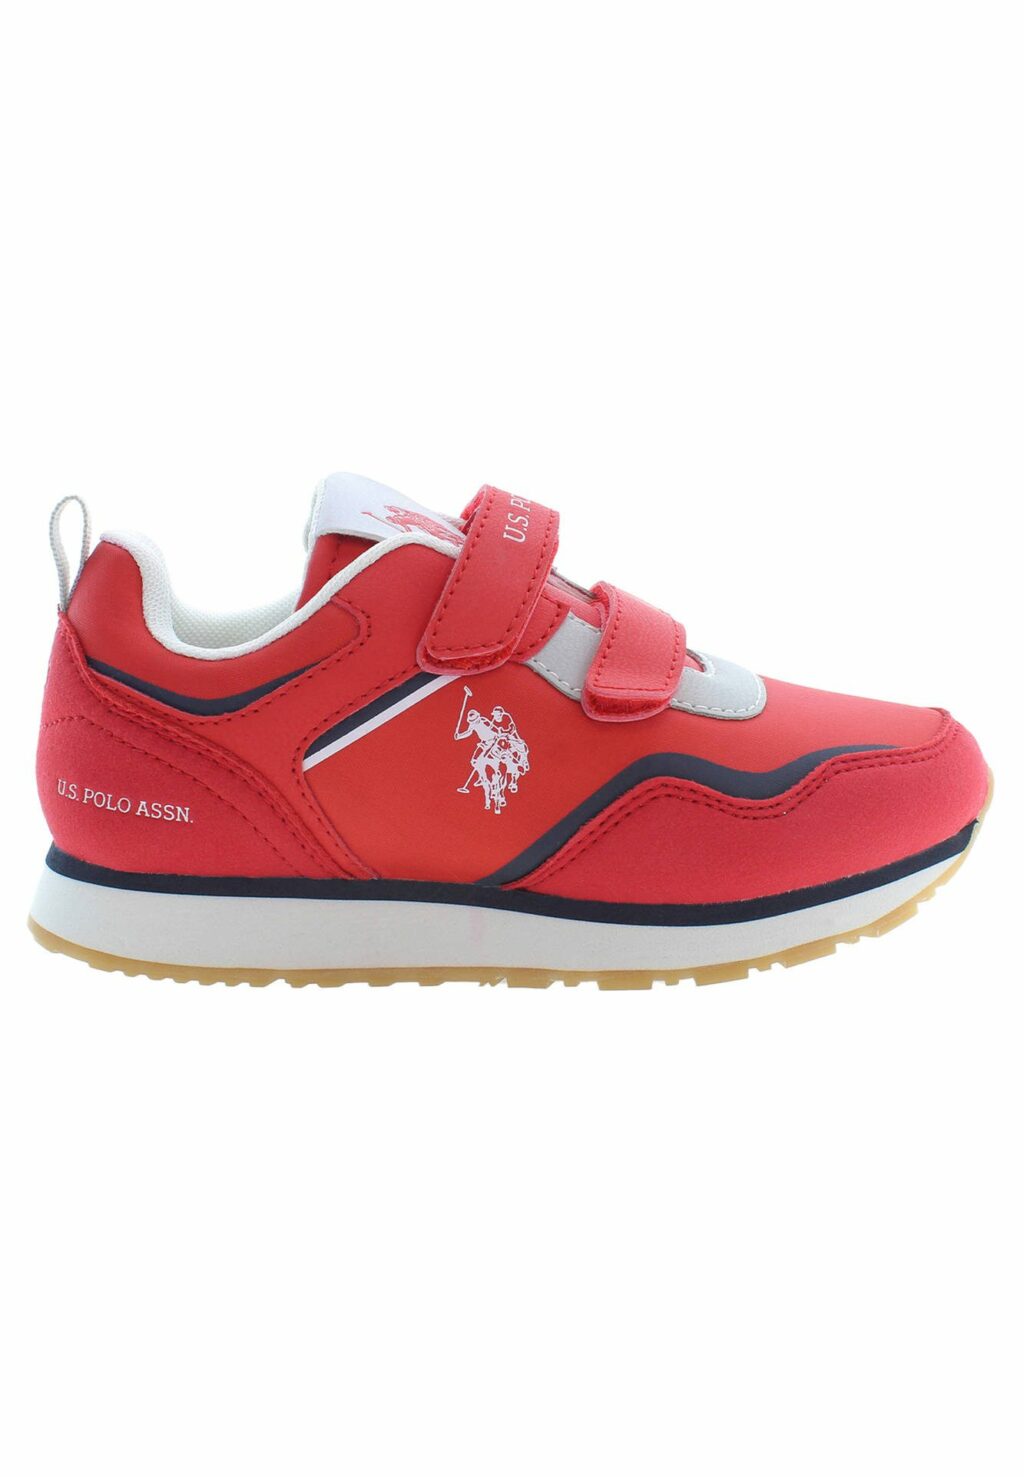 US POLO BEST PRICE RED SPORTS SHOES FOR KIDS NOBIK009K3NH1_ROSSO_RED-DBL02